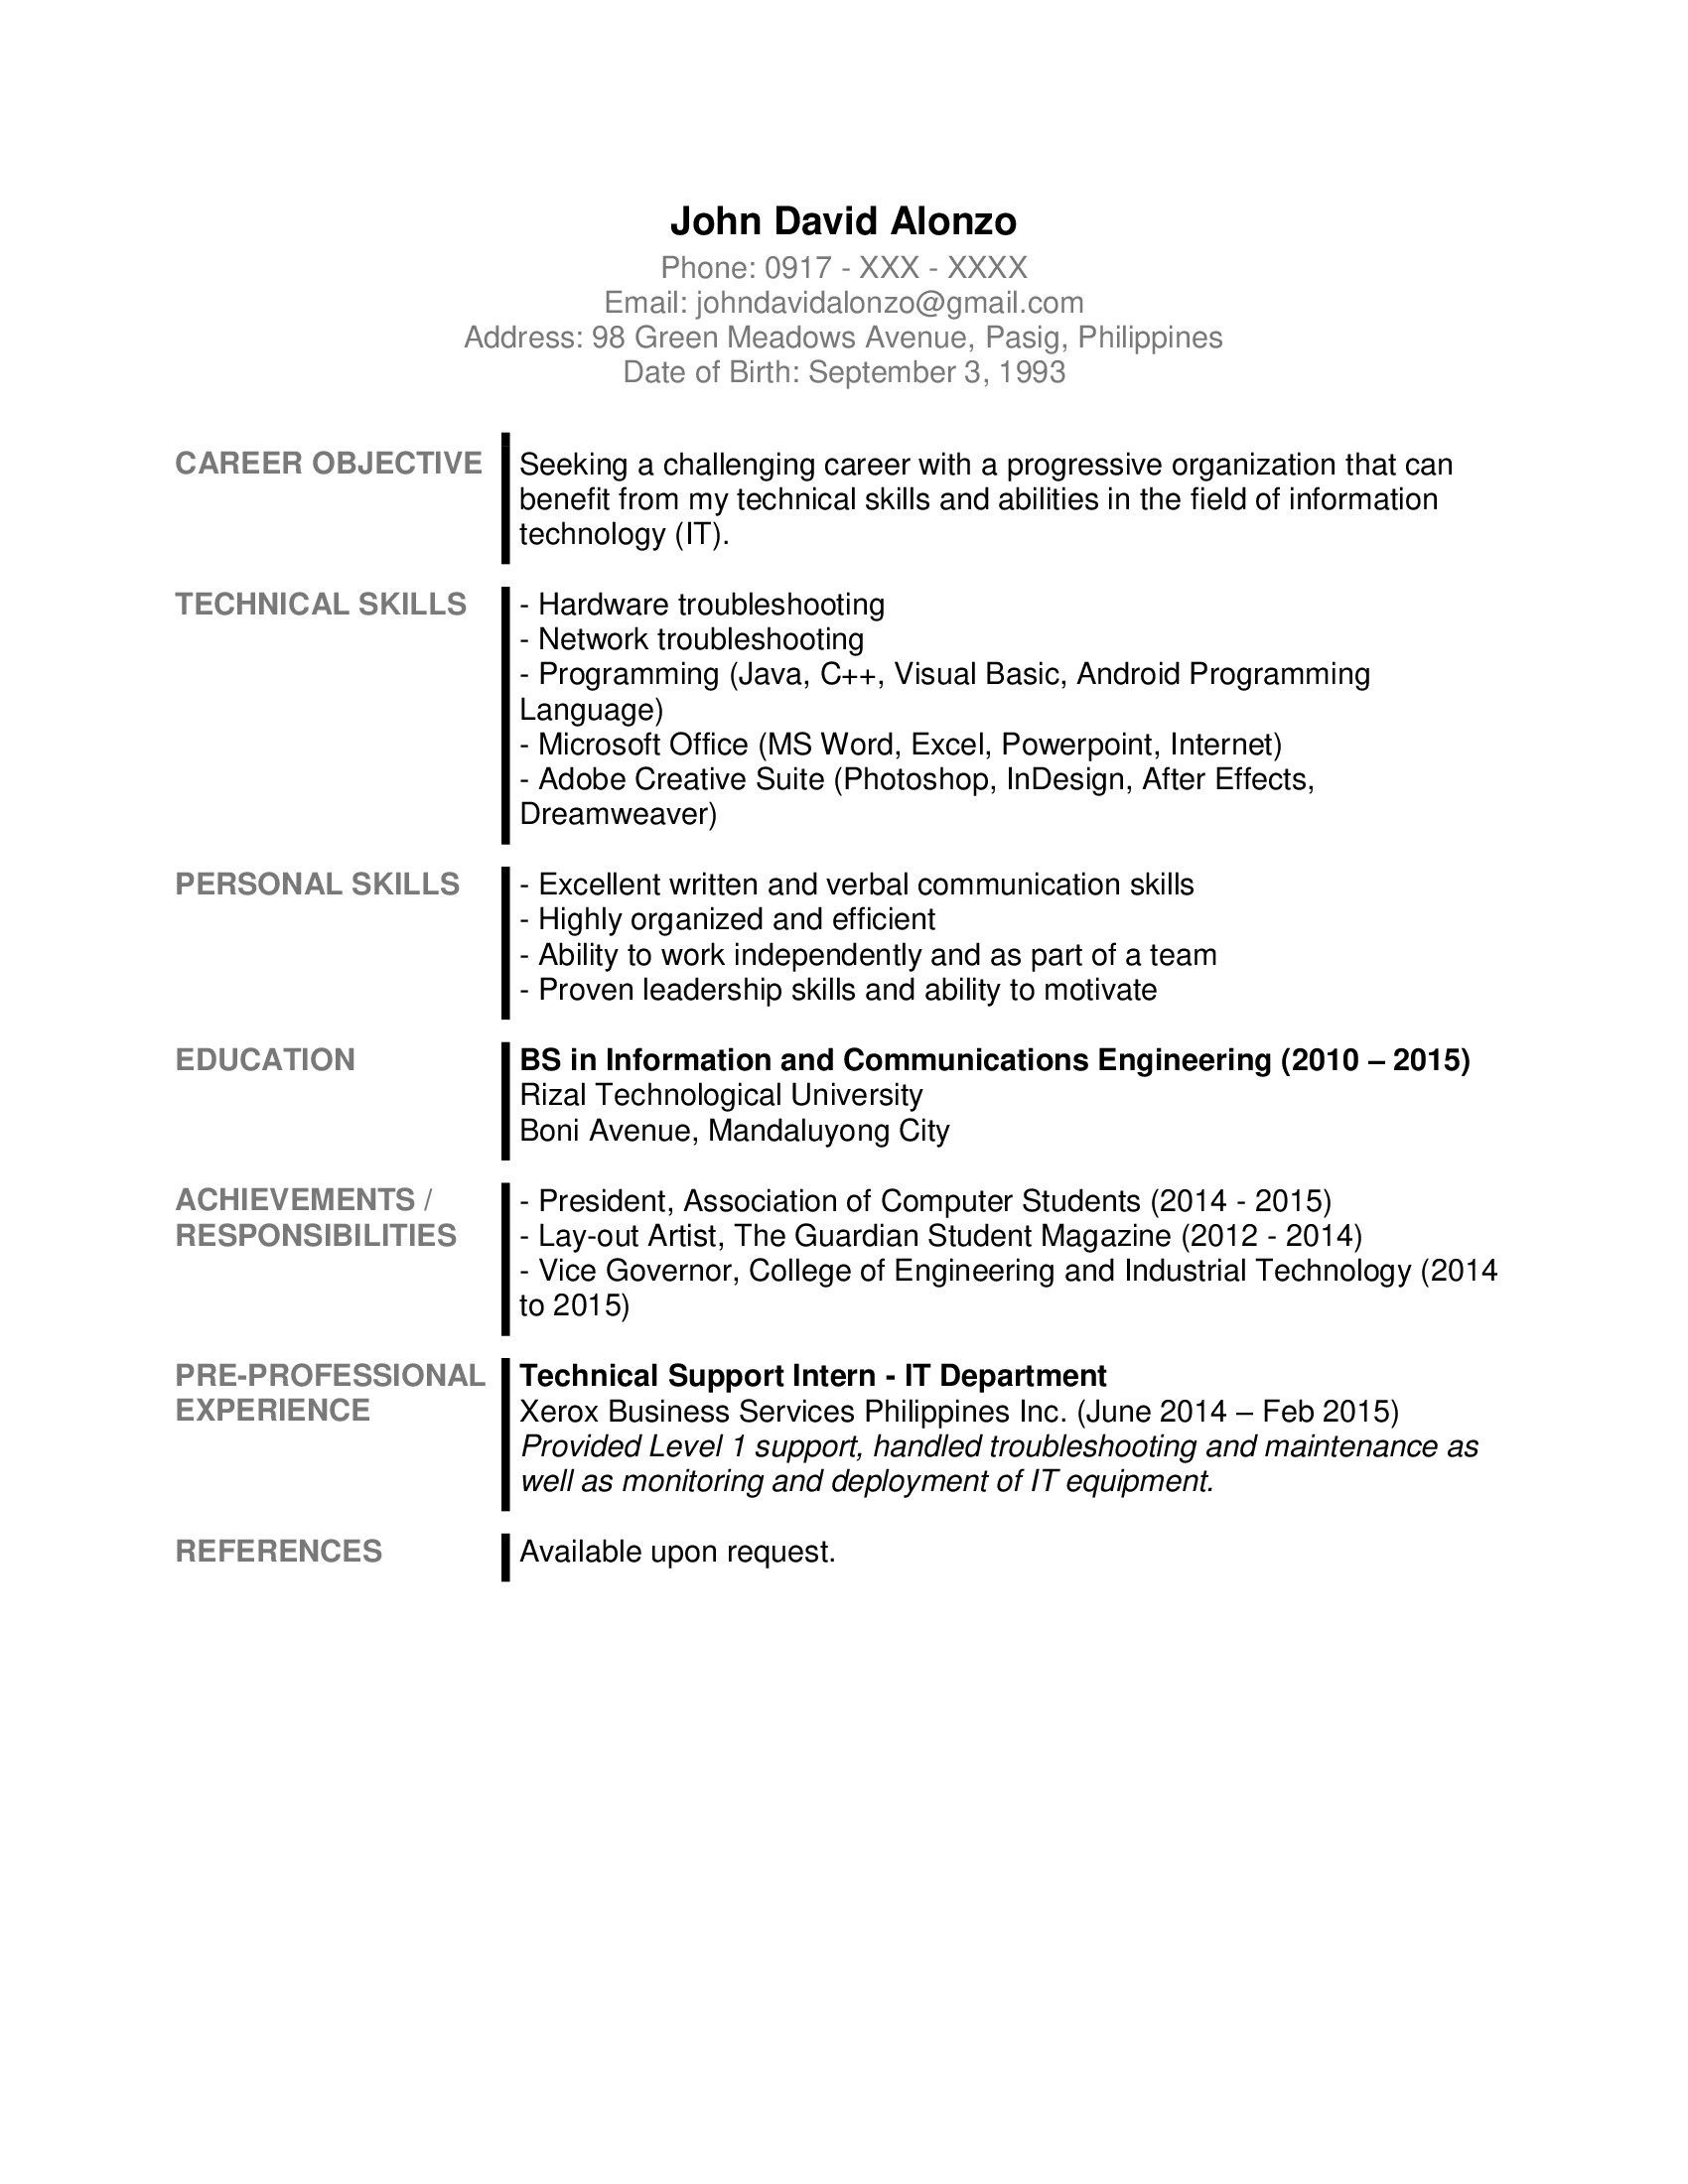 Sample Resume Objectives for College Graduates Sample Resume formats for Fresh Graduates